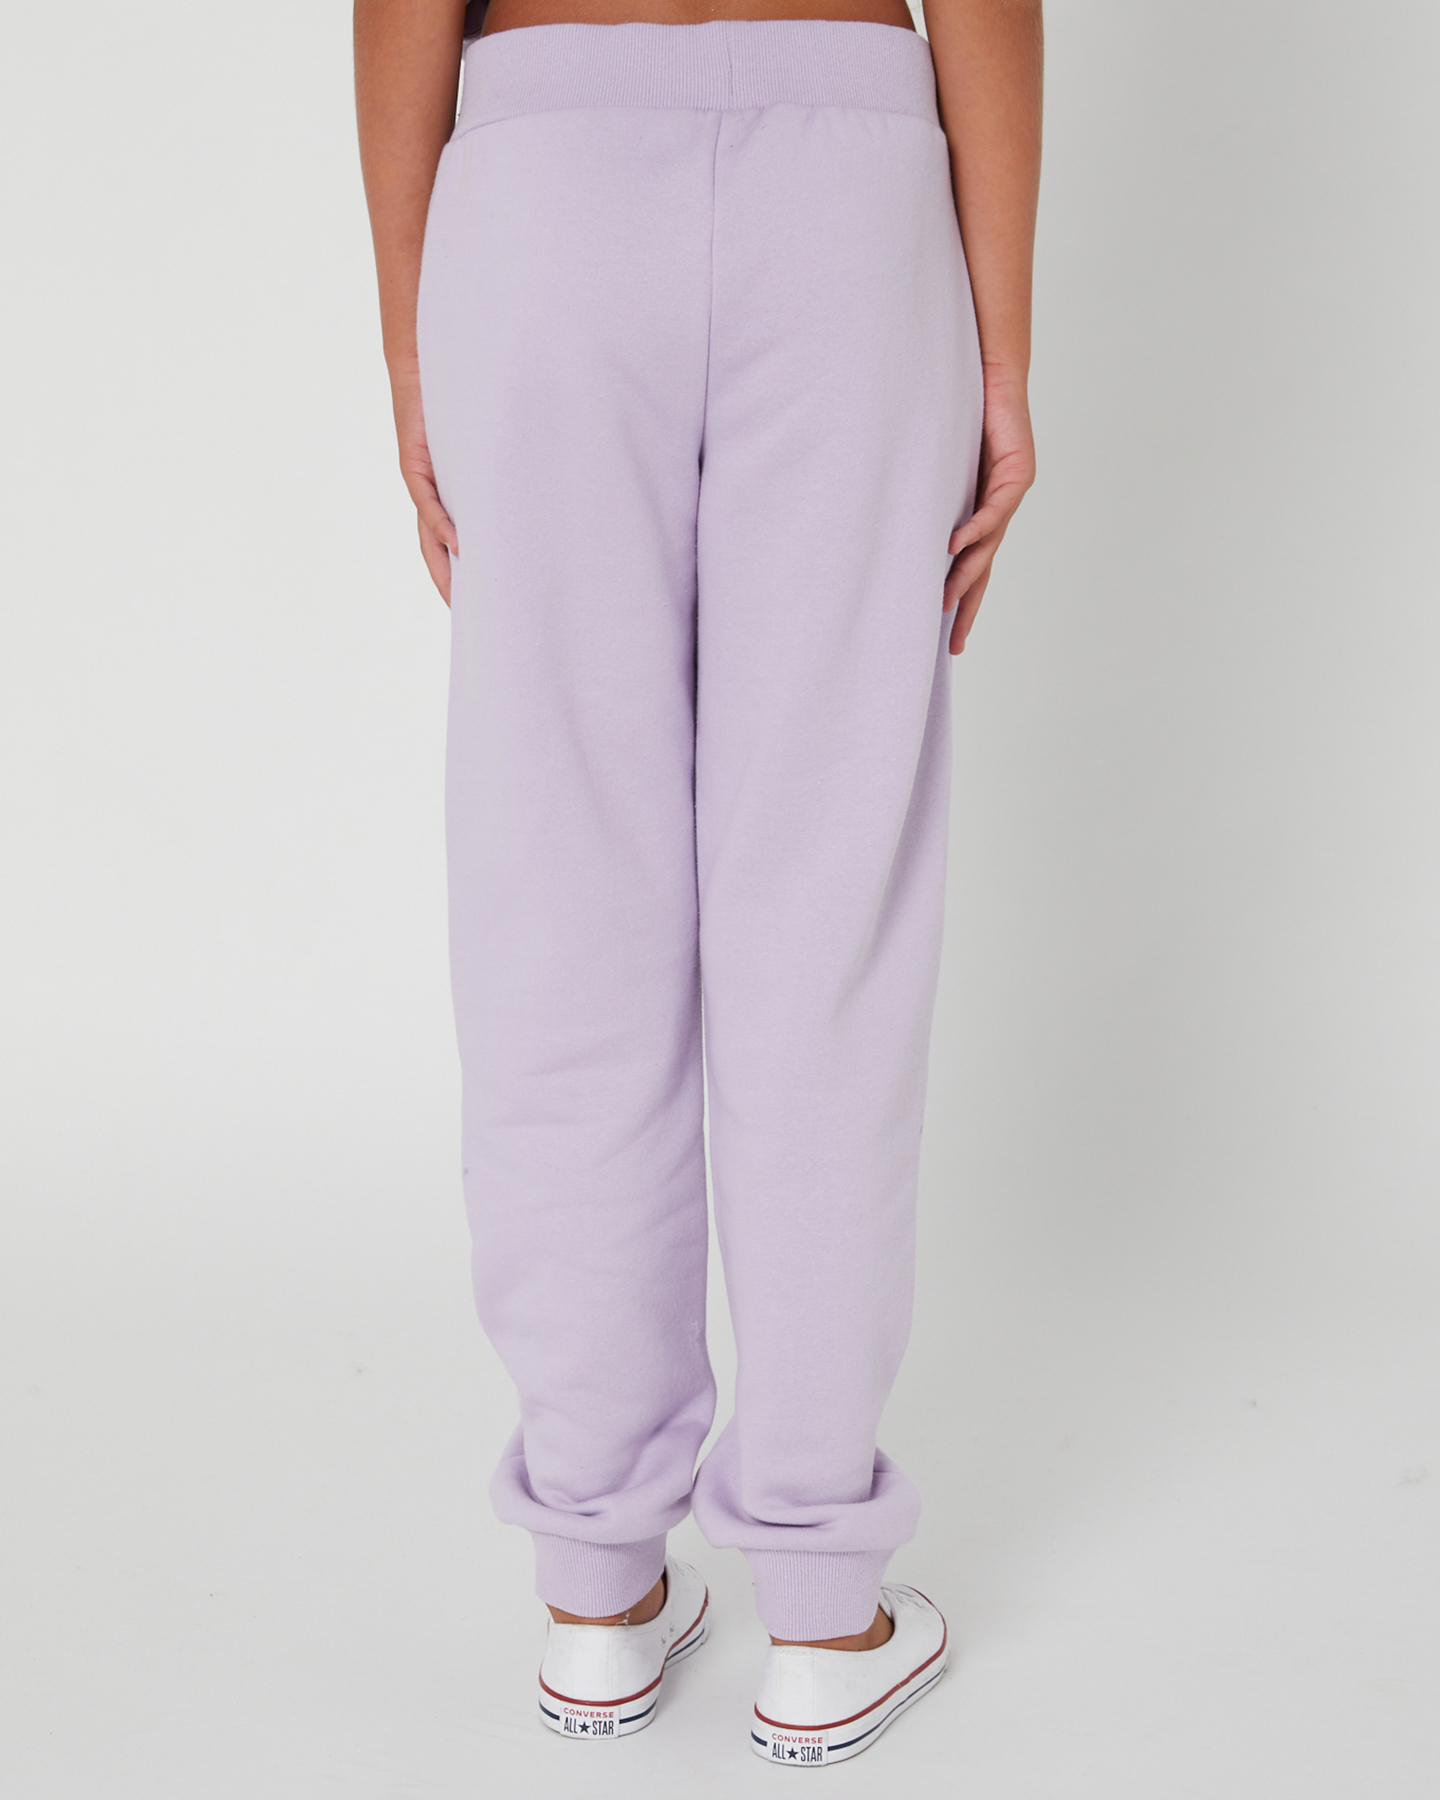 Swell Girls Classic Track Pant - Lilac | SurfStitch